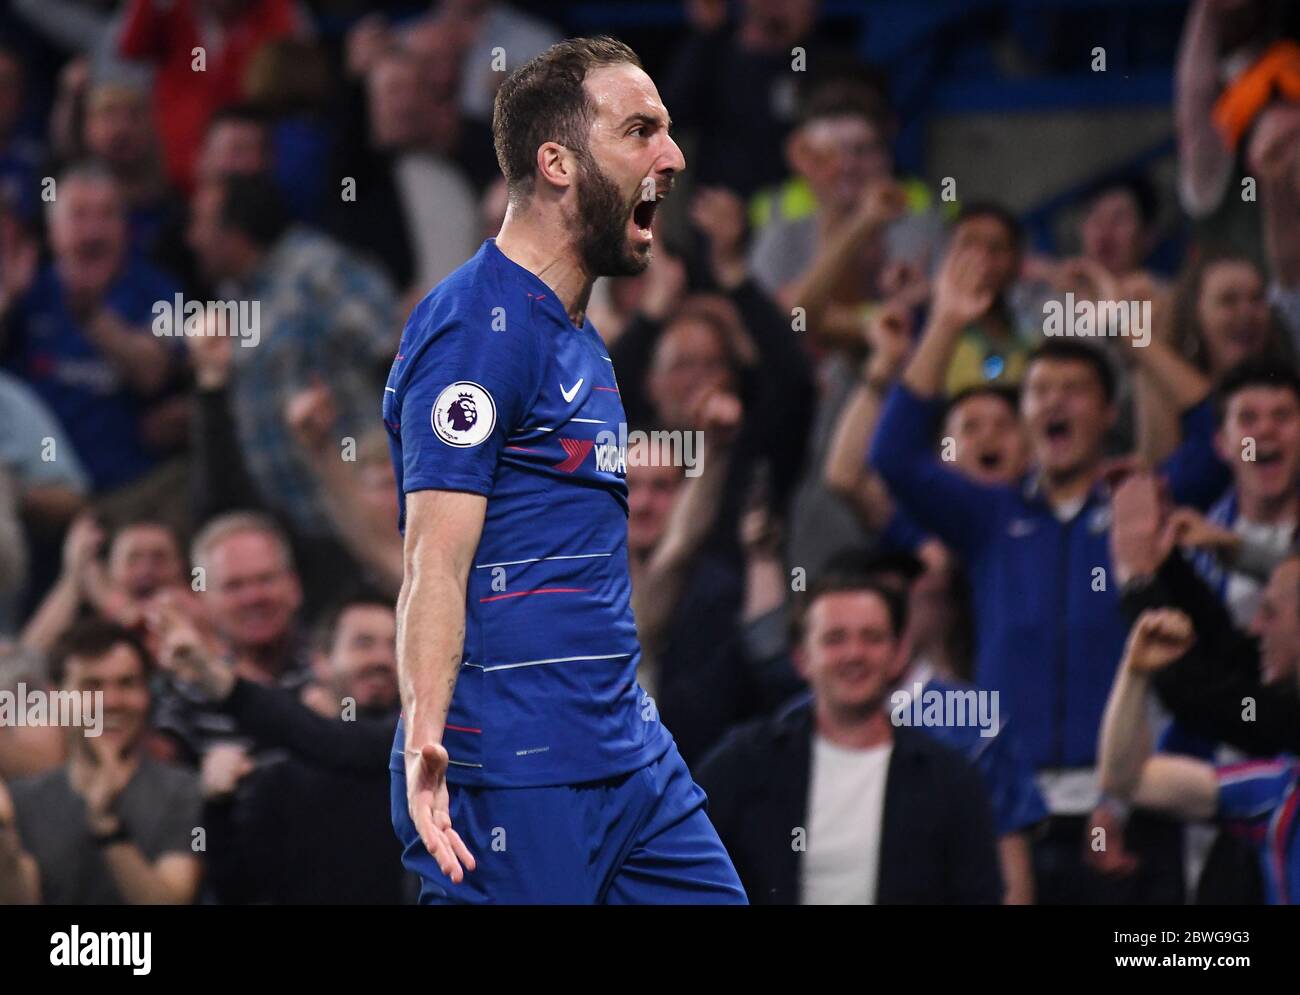 LONDON, ENGLAND - APRIL 22, 2019: Gonzalo Higuain of Chelsea celebrates after he scored a goal during the 2018/19 Premier League game between Chelsea Stock Photo